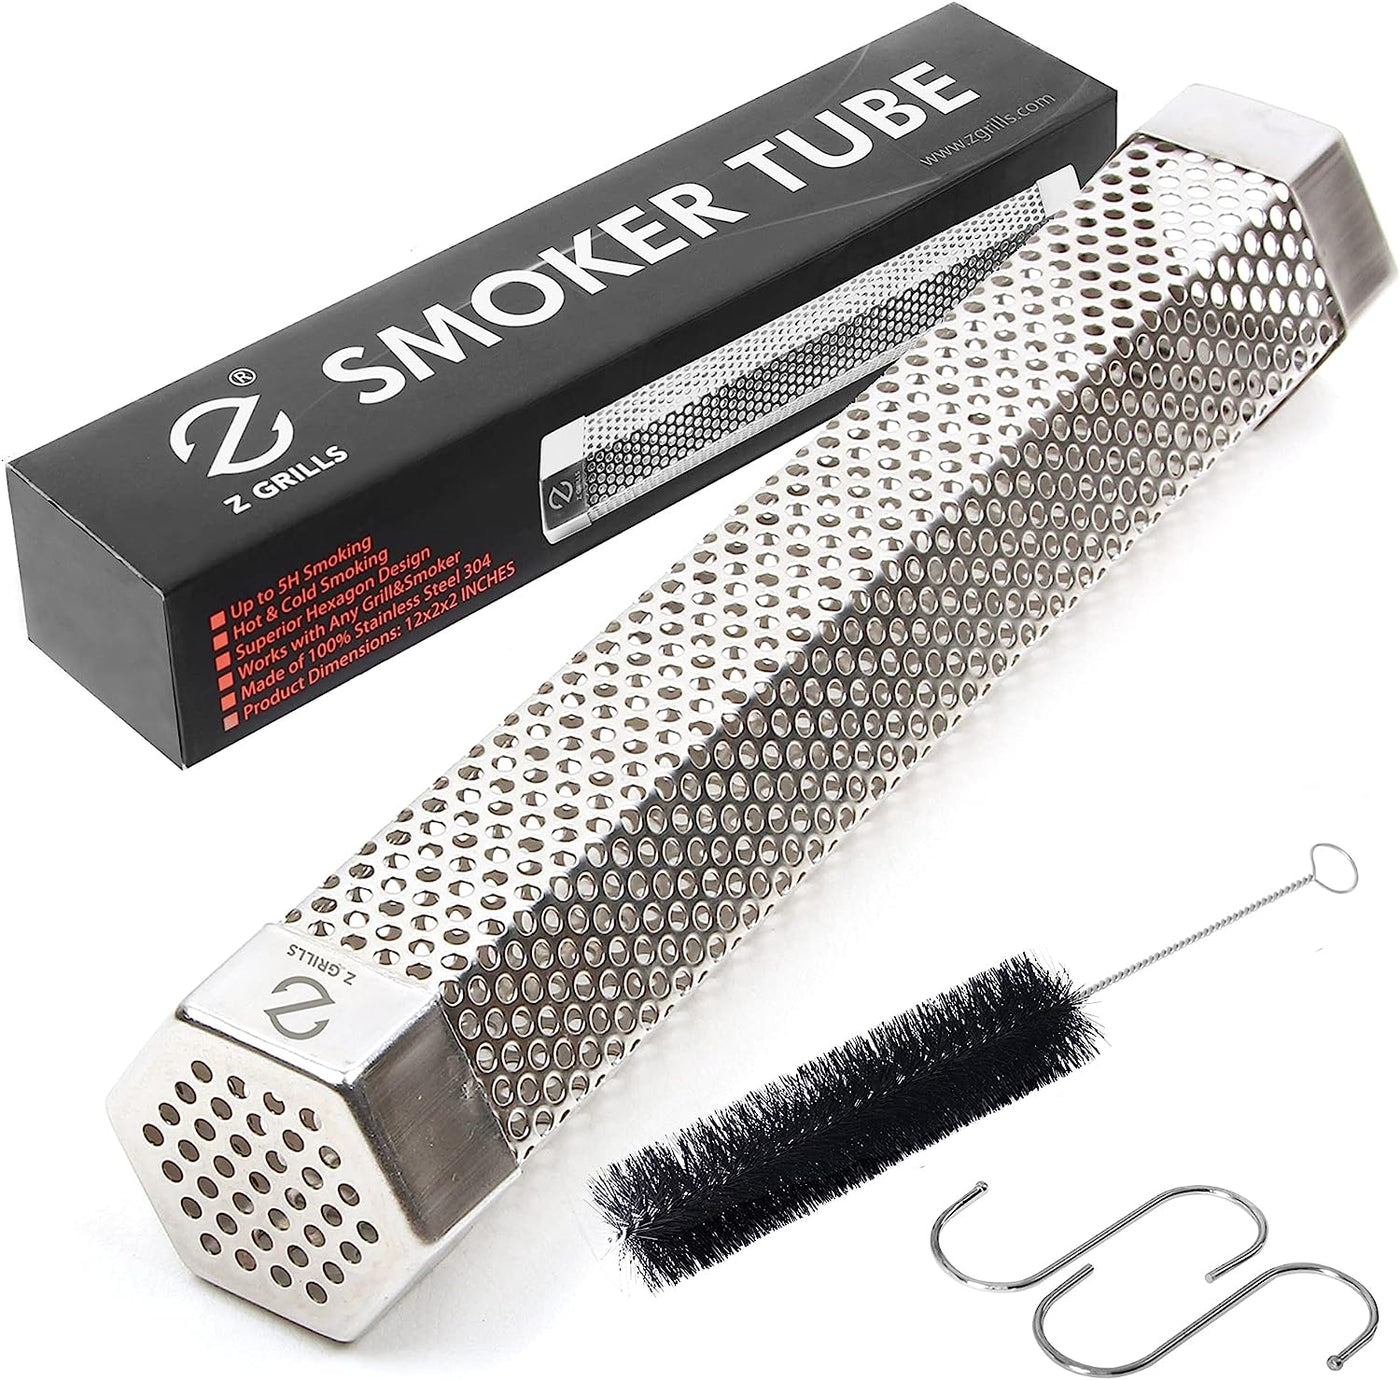 Pellet Smoker Tube for Pellet Grill,12 inch Stainless Steel BBQ Wood Pellet Tube Smoker Box Smoking Tubes for A Pellet Smoking,5 Hours of Billowing